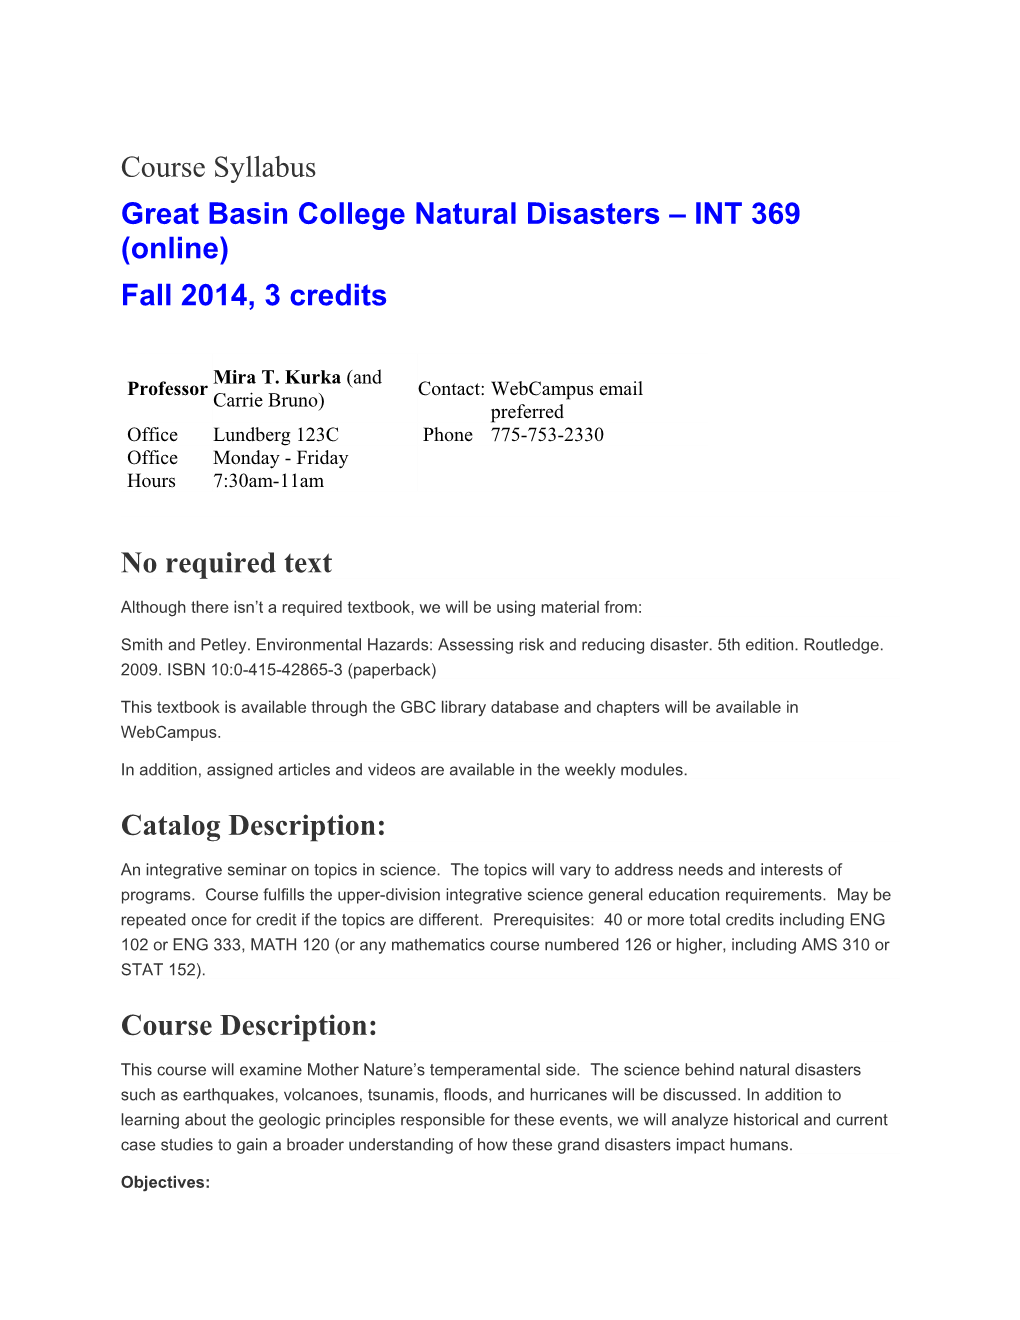 Great Basin Collegenatural Disasters INT 369 (Online)